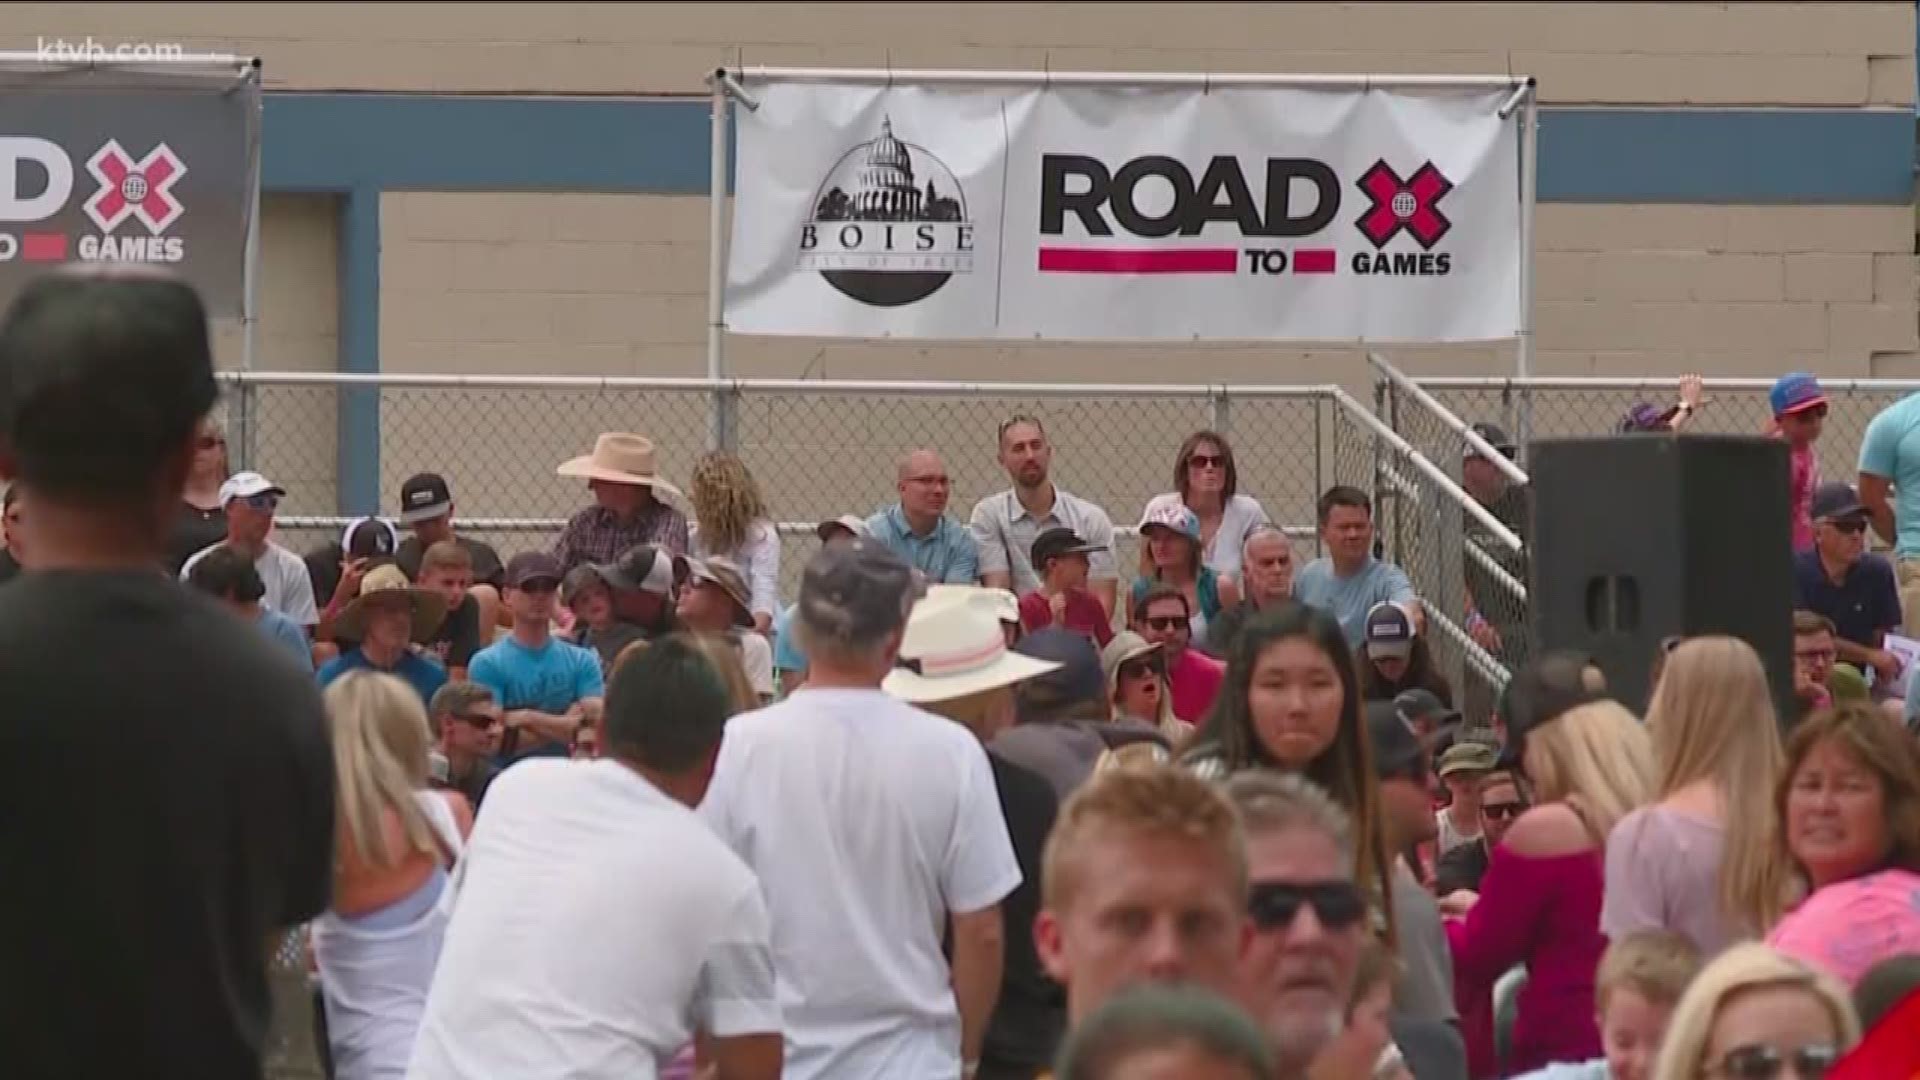 The City of Boise and ESPN announced Saturday that they've agreed to have an X Games qualifying event at Rhodes Skate Park again in 2019.